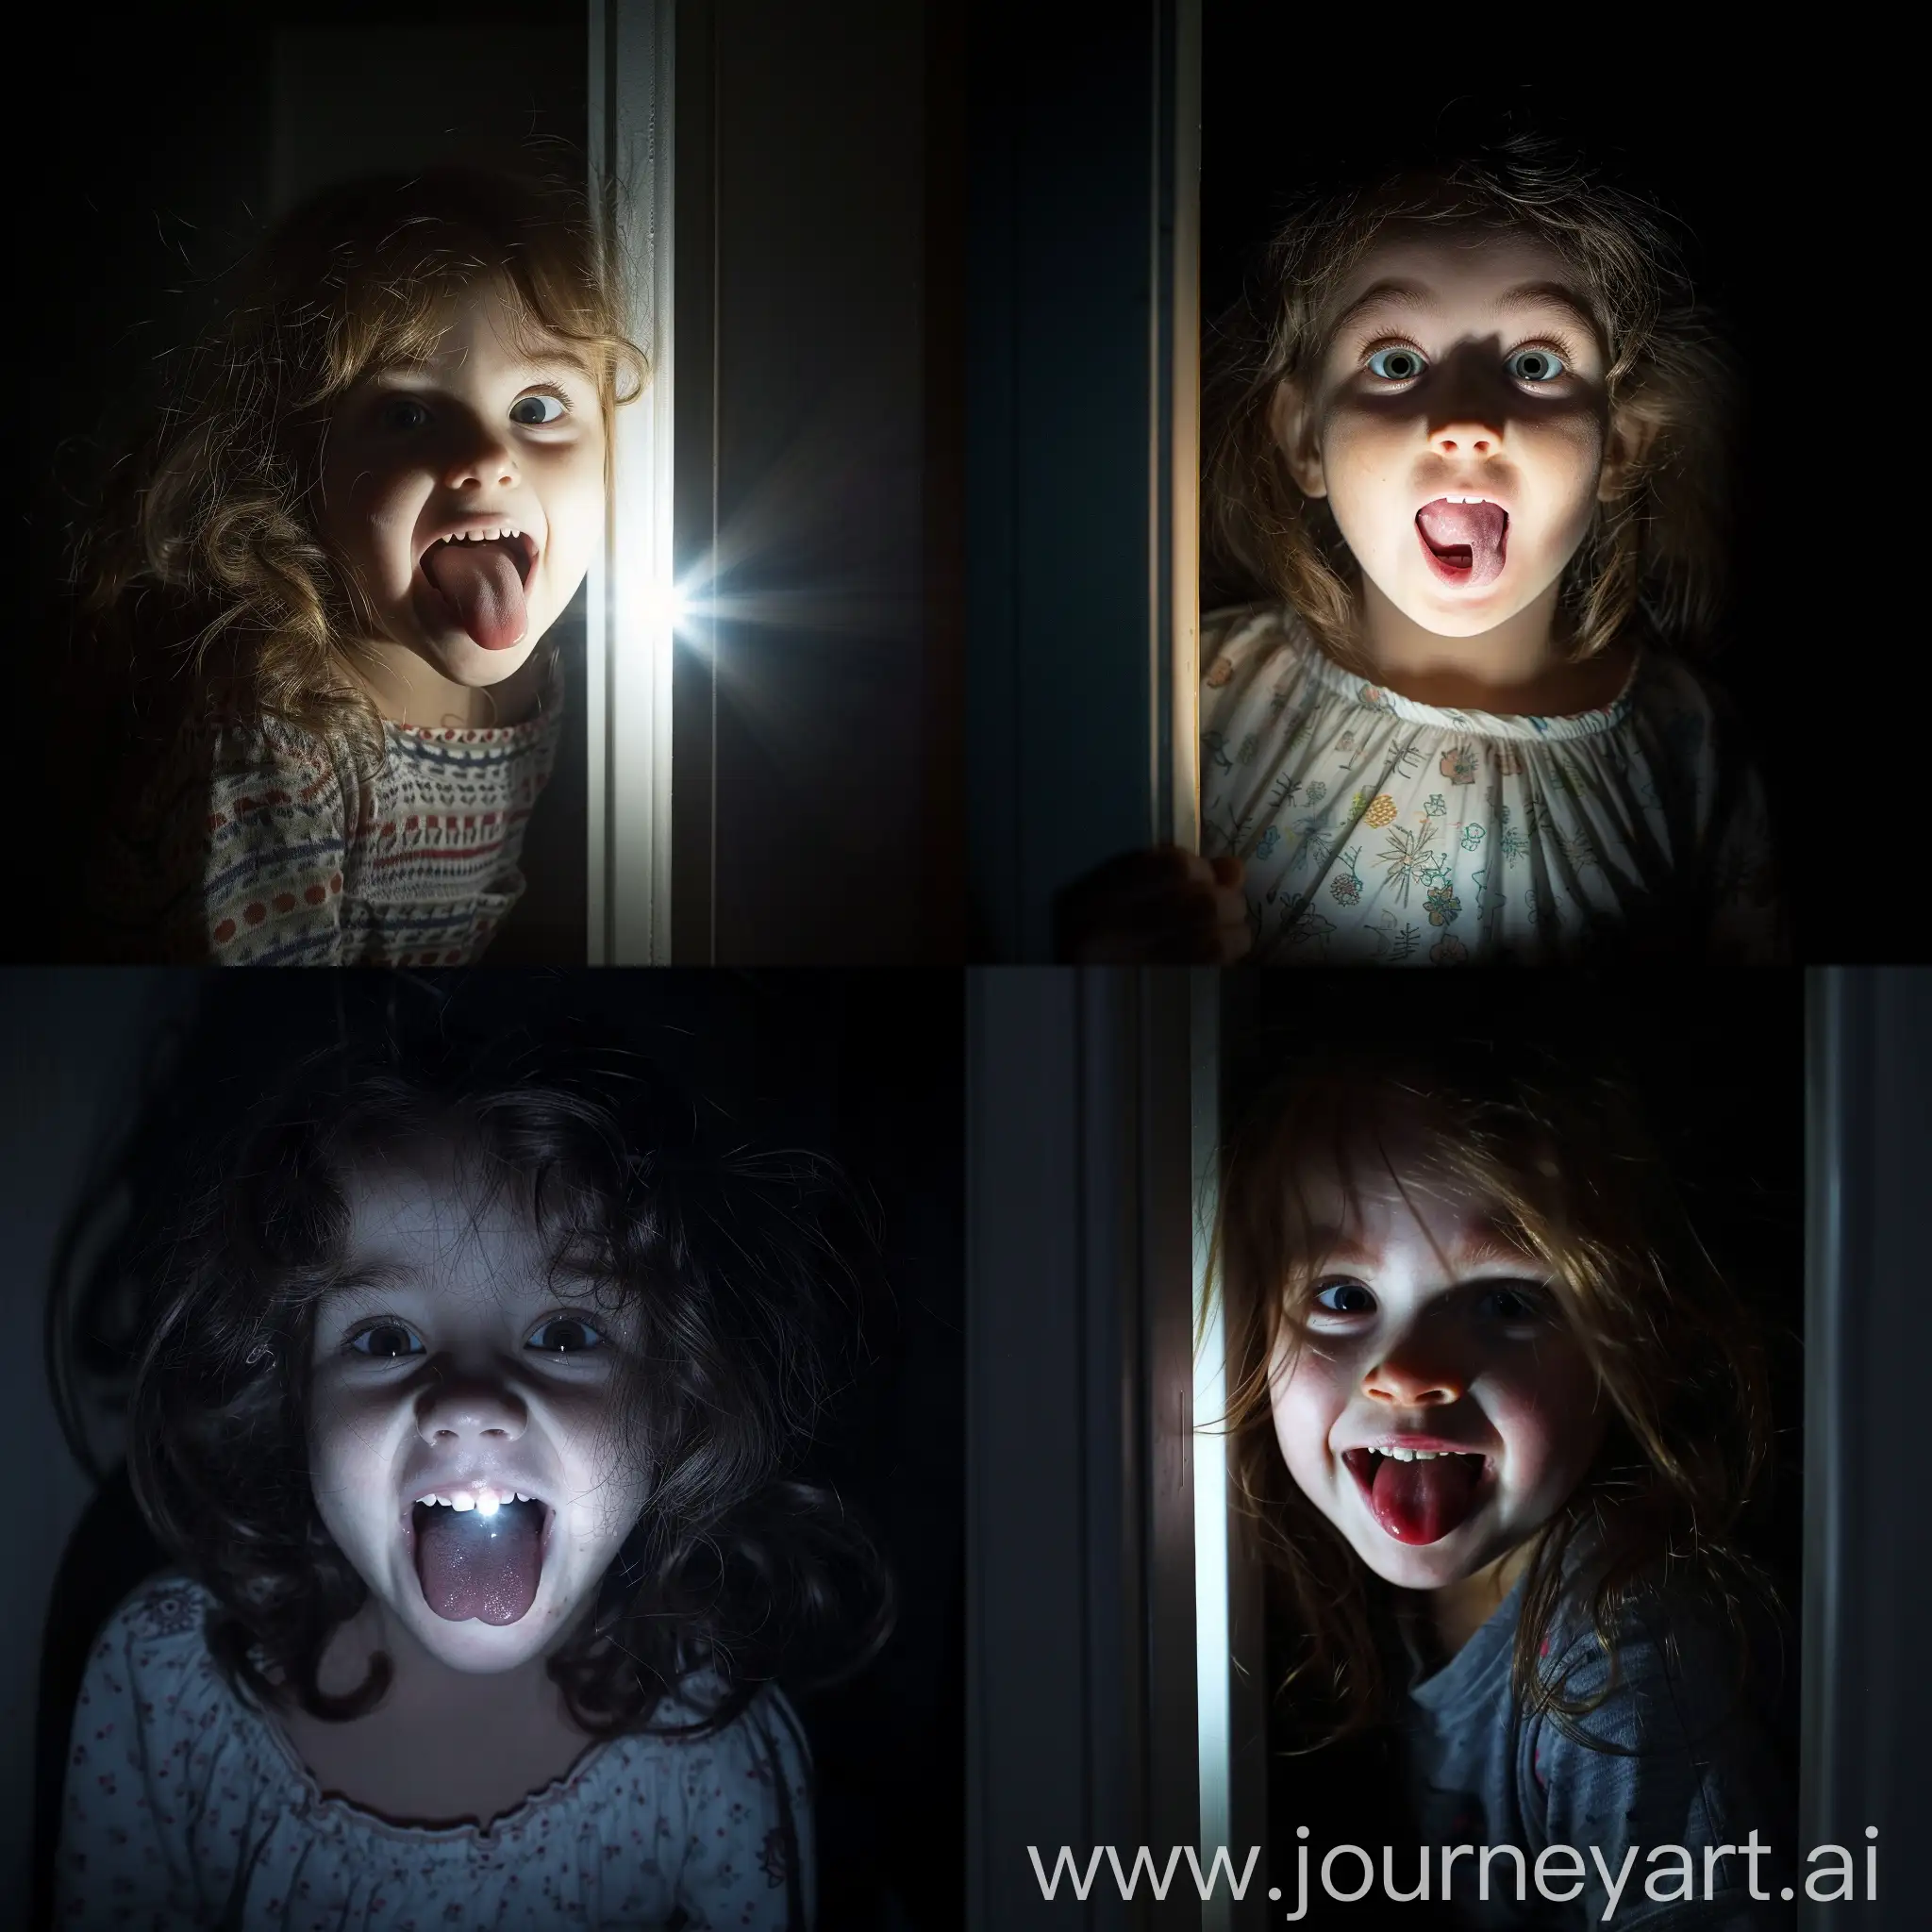 Bright front flash light illumination, isolated on a cheeky young girl pulling a funny face poking her tongue out, after being caught hiding in a closet at night, with a laughing cheeky expression. light in the style of a bright white flash of Chiaroscuro light like a bright spotlight.